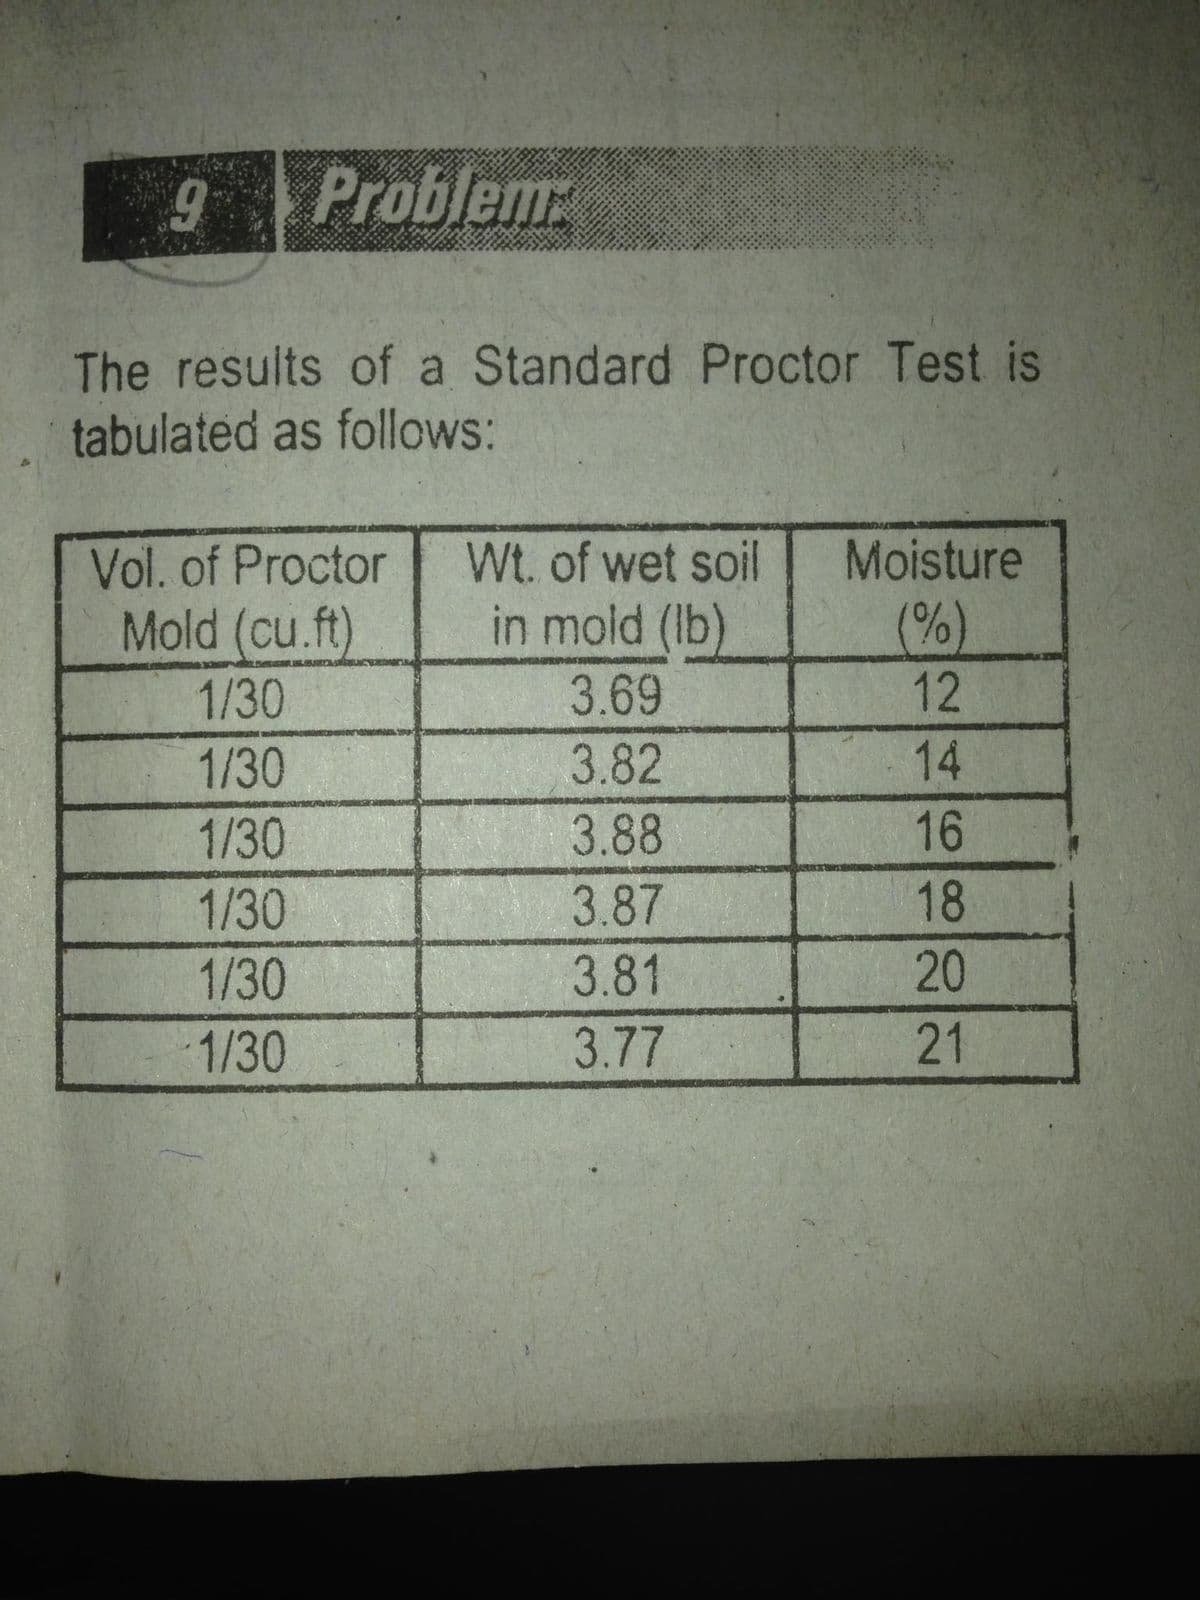 6.
Problem:
The results of a Standard Proctor Test is
tabulated as follows:
Vol. of Proctor
Mold (cu.ft)
Wt. of wet soil
Moisture
in mold (Ib)
(%)
12
1/30
3.69
1/30
3.82
14
1/30
3.88
16
1/30
3.87
18
1/30
3.81
20
1/30
3.77
21
